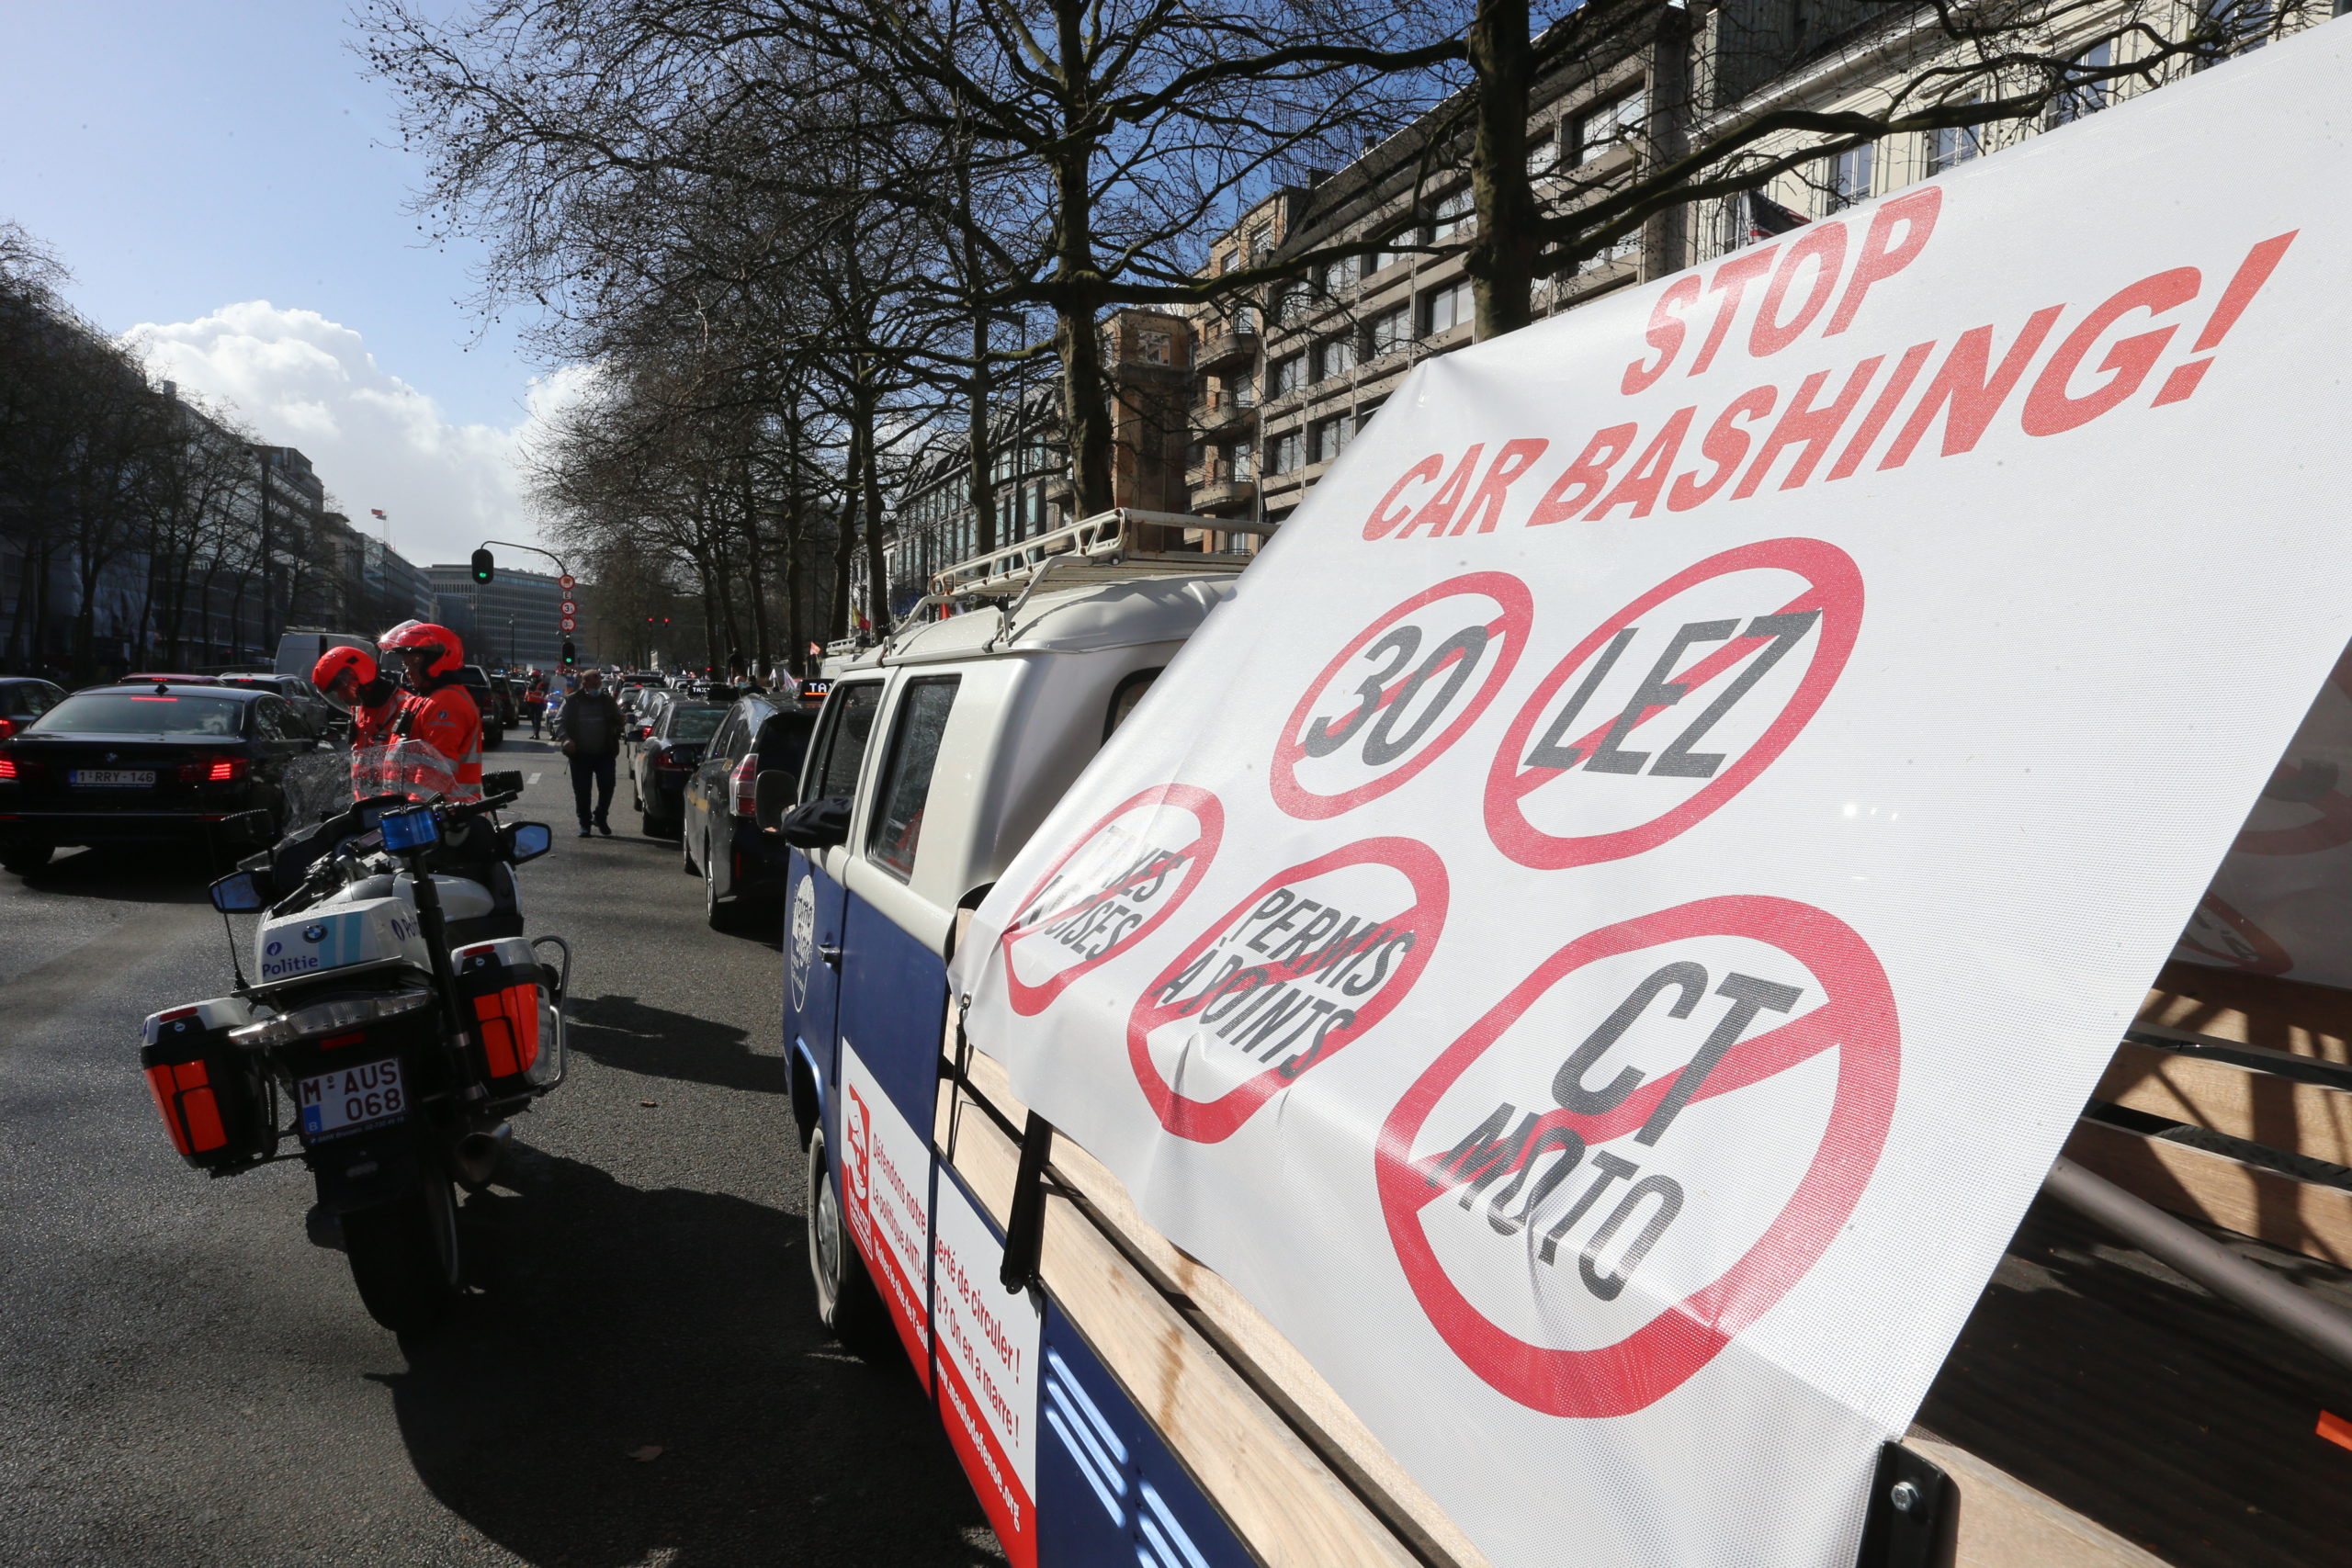 Taxis rally in protest against Brussels mobility policy (update)